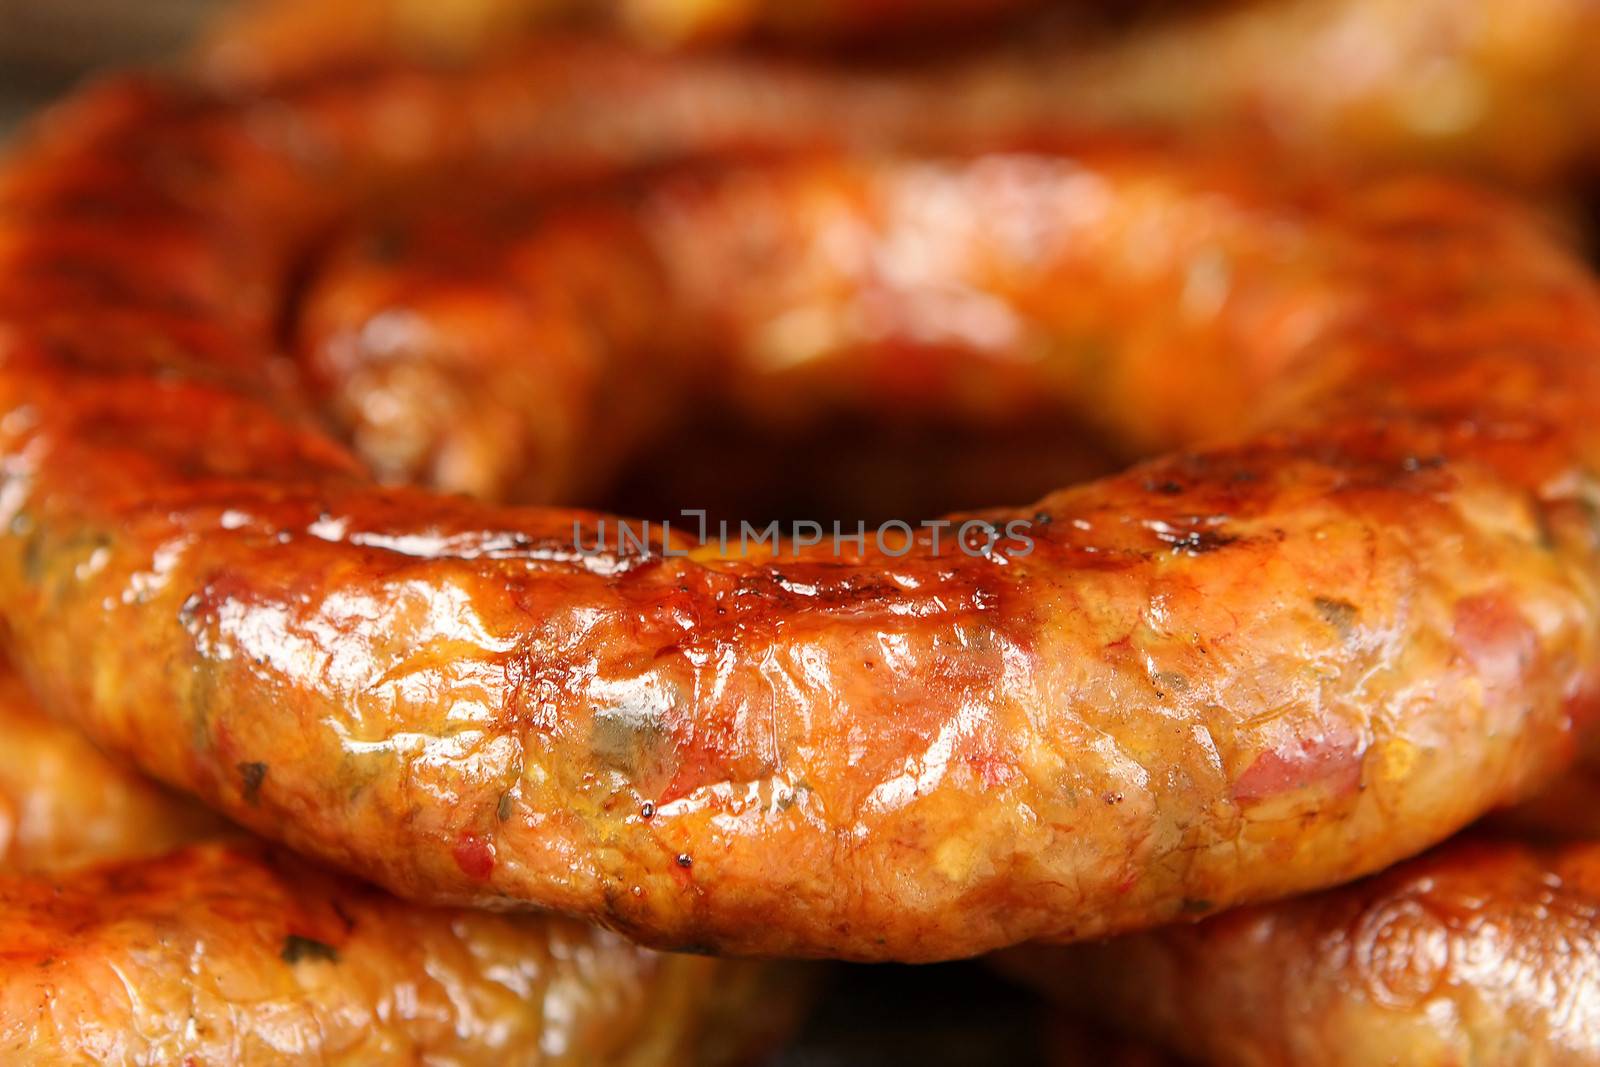 Appetizing fried homemade sausage ring - close-up by cococinema